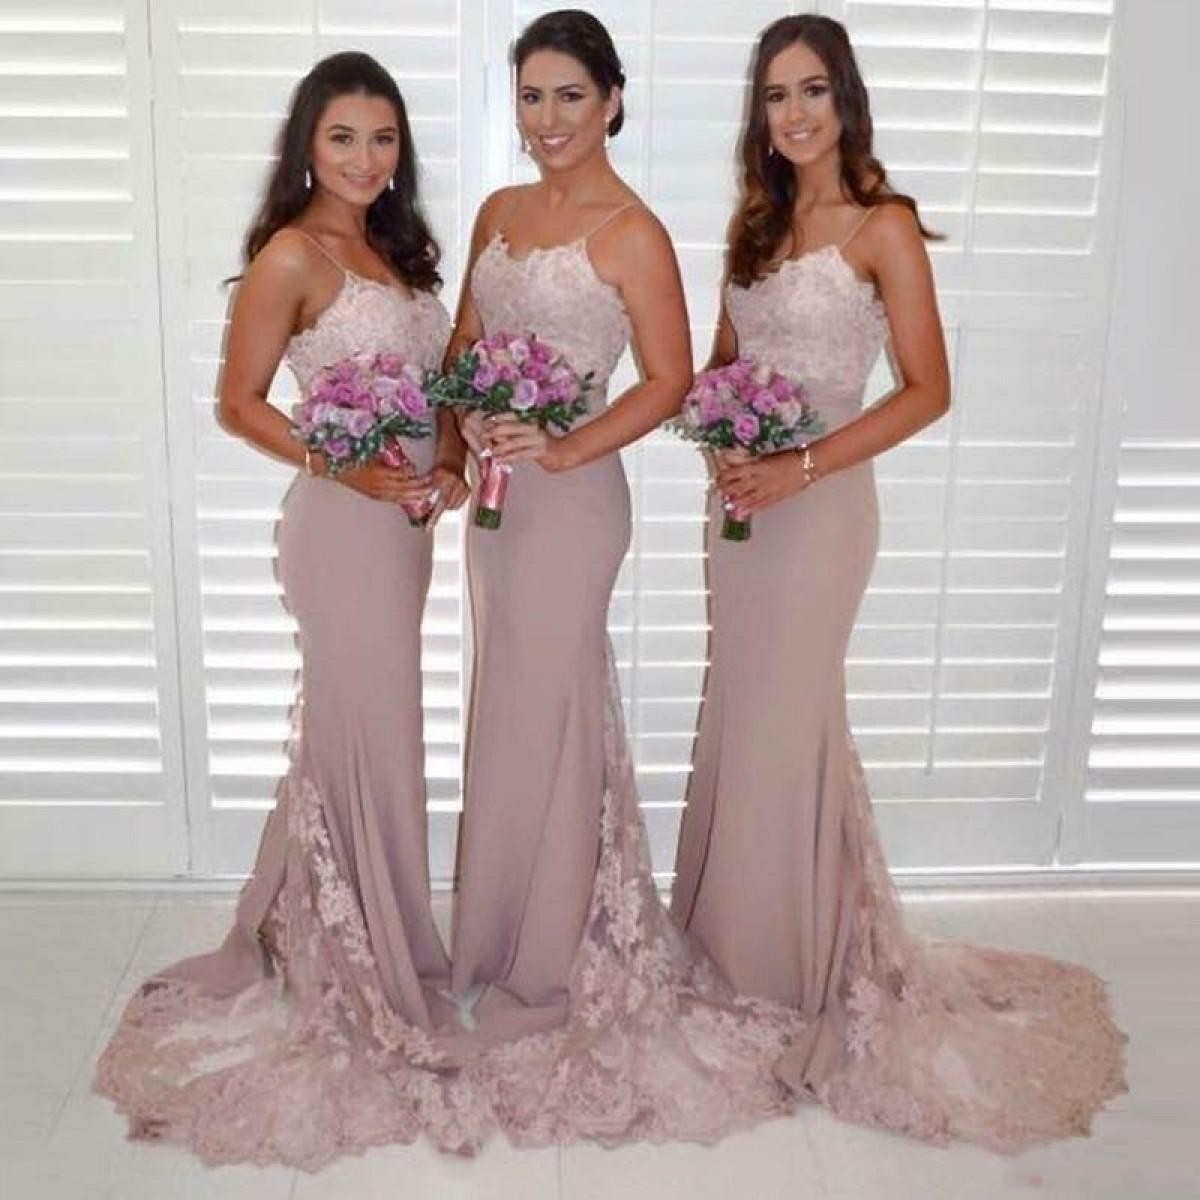 

Elegant Blush Pink Spaghetti Straps Mermaid Lace Bridesmaid Dresses Cheap with Appliqued Country Satin Sweep Train Party Maid of honor Gowns